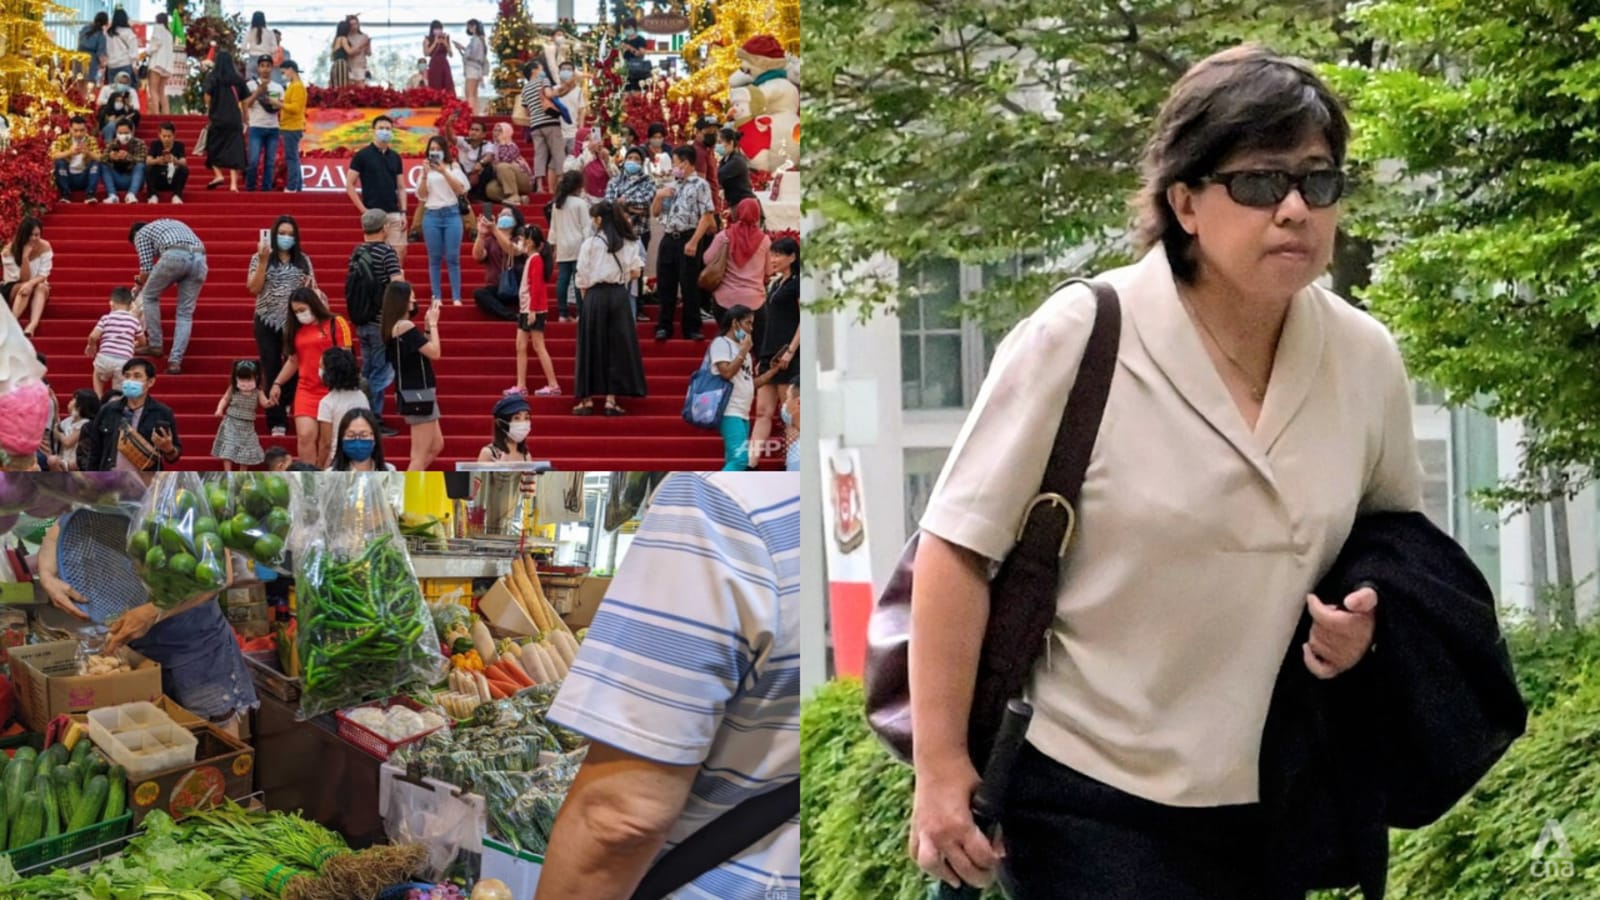 Daily round-up, Sep 7: Malaysia lifts indoor mask mandate; wet market vegetable prices in Singapore rising